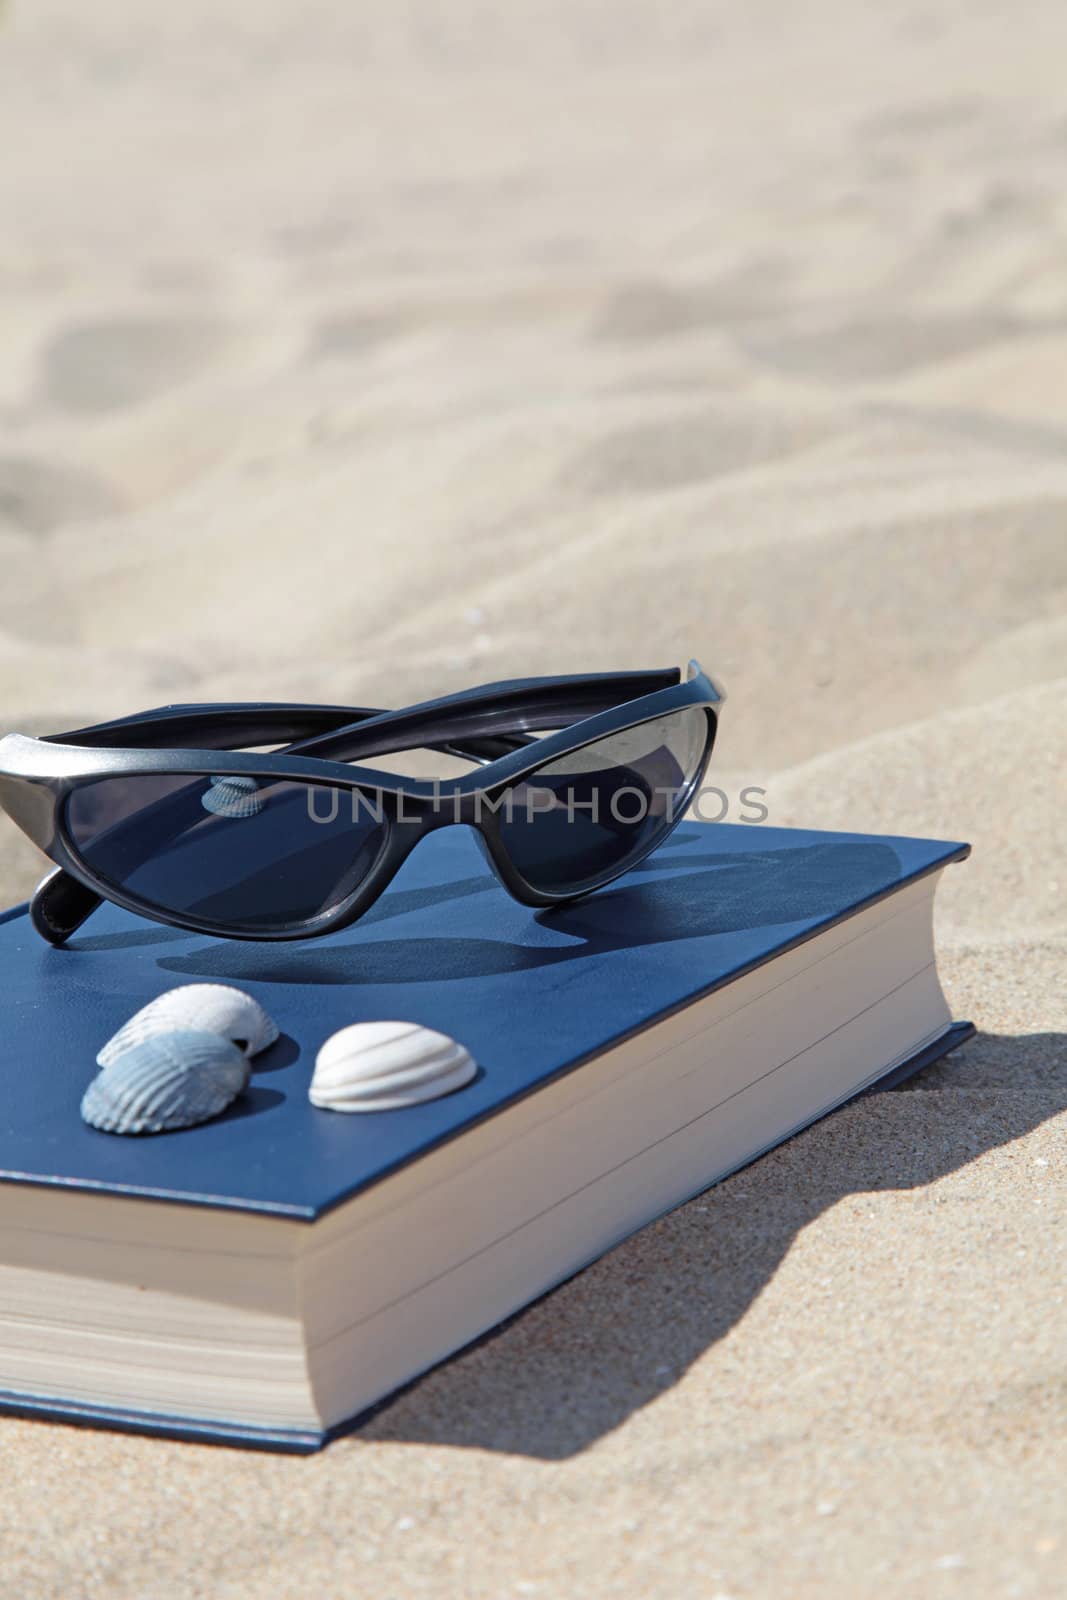 A book and sunglasses lying in the sand, symbolizing recreation.